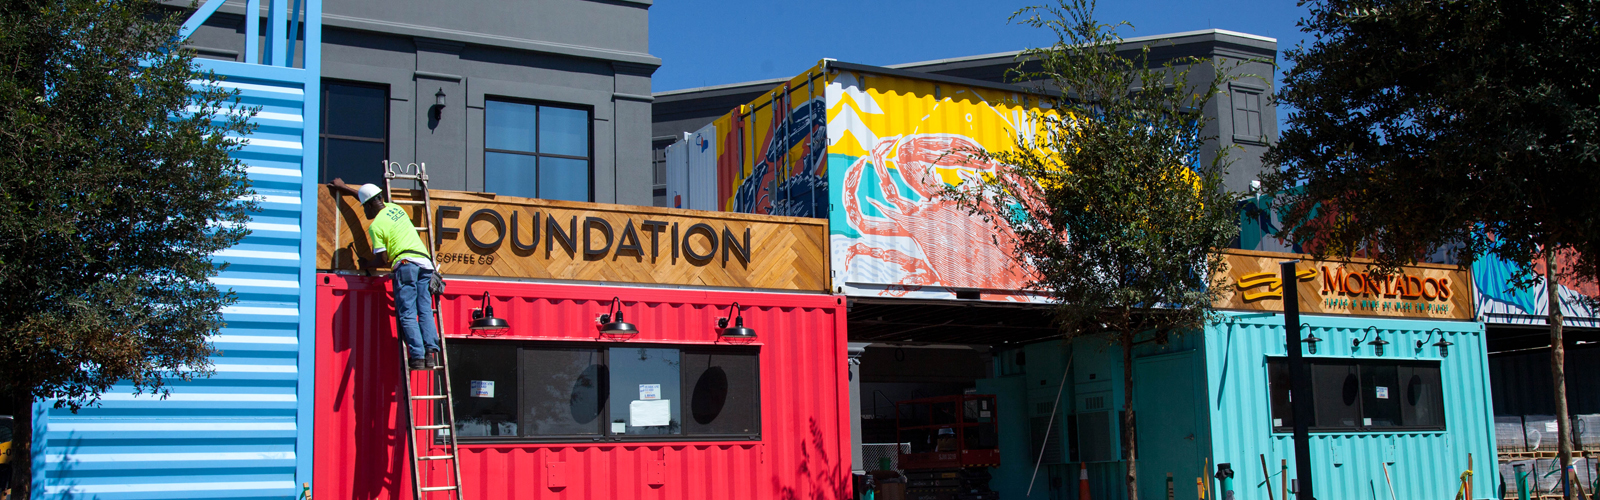 Restaurants inside eclectic shipping containers at Sparkman Wharf in the Channelside District.